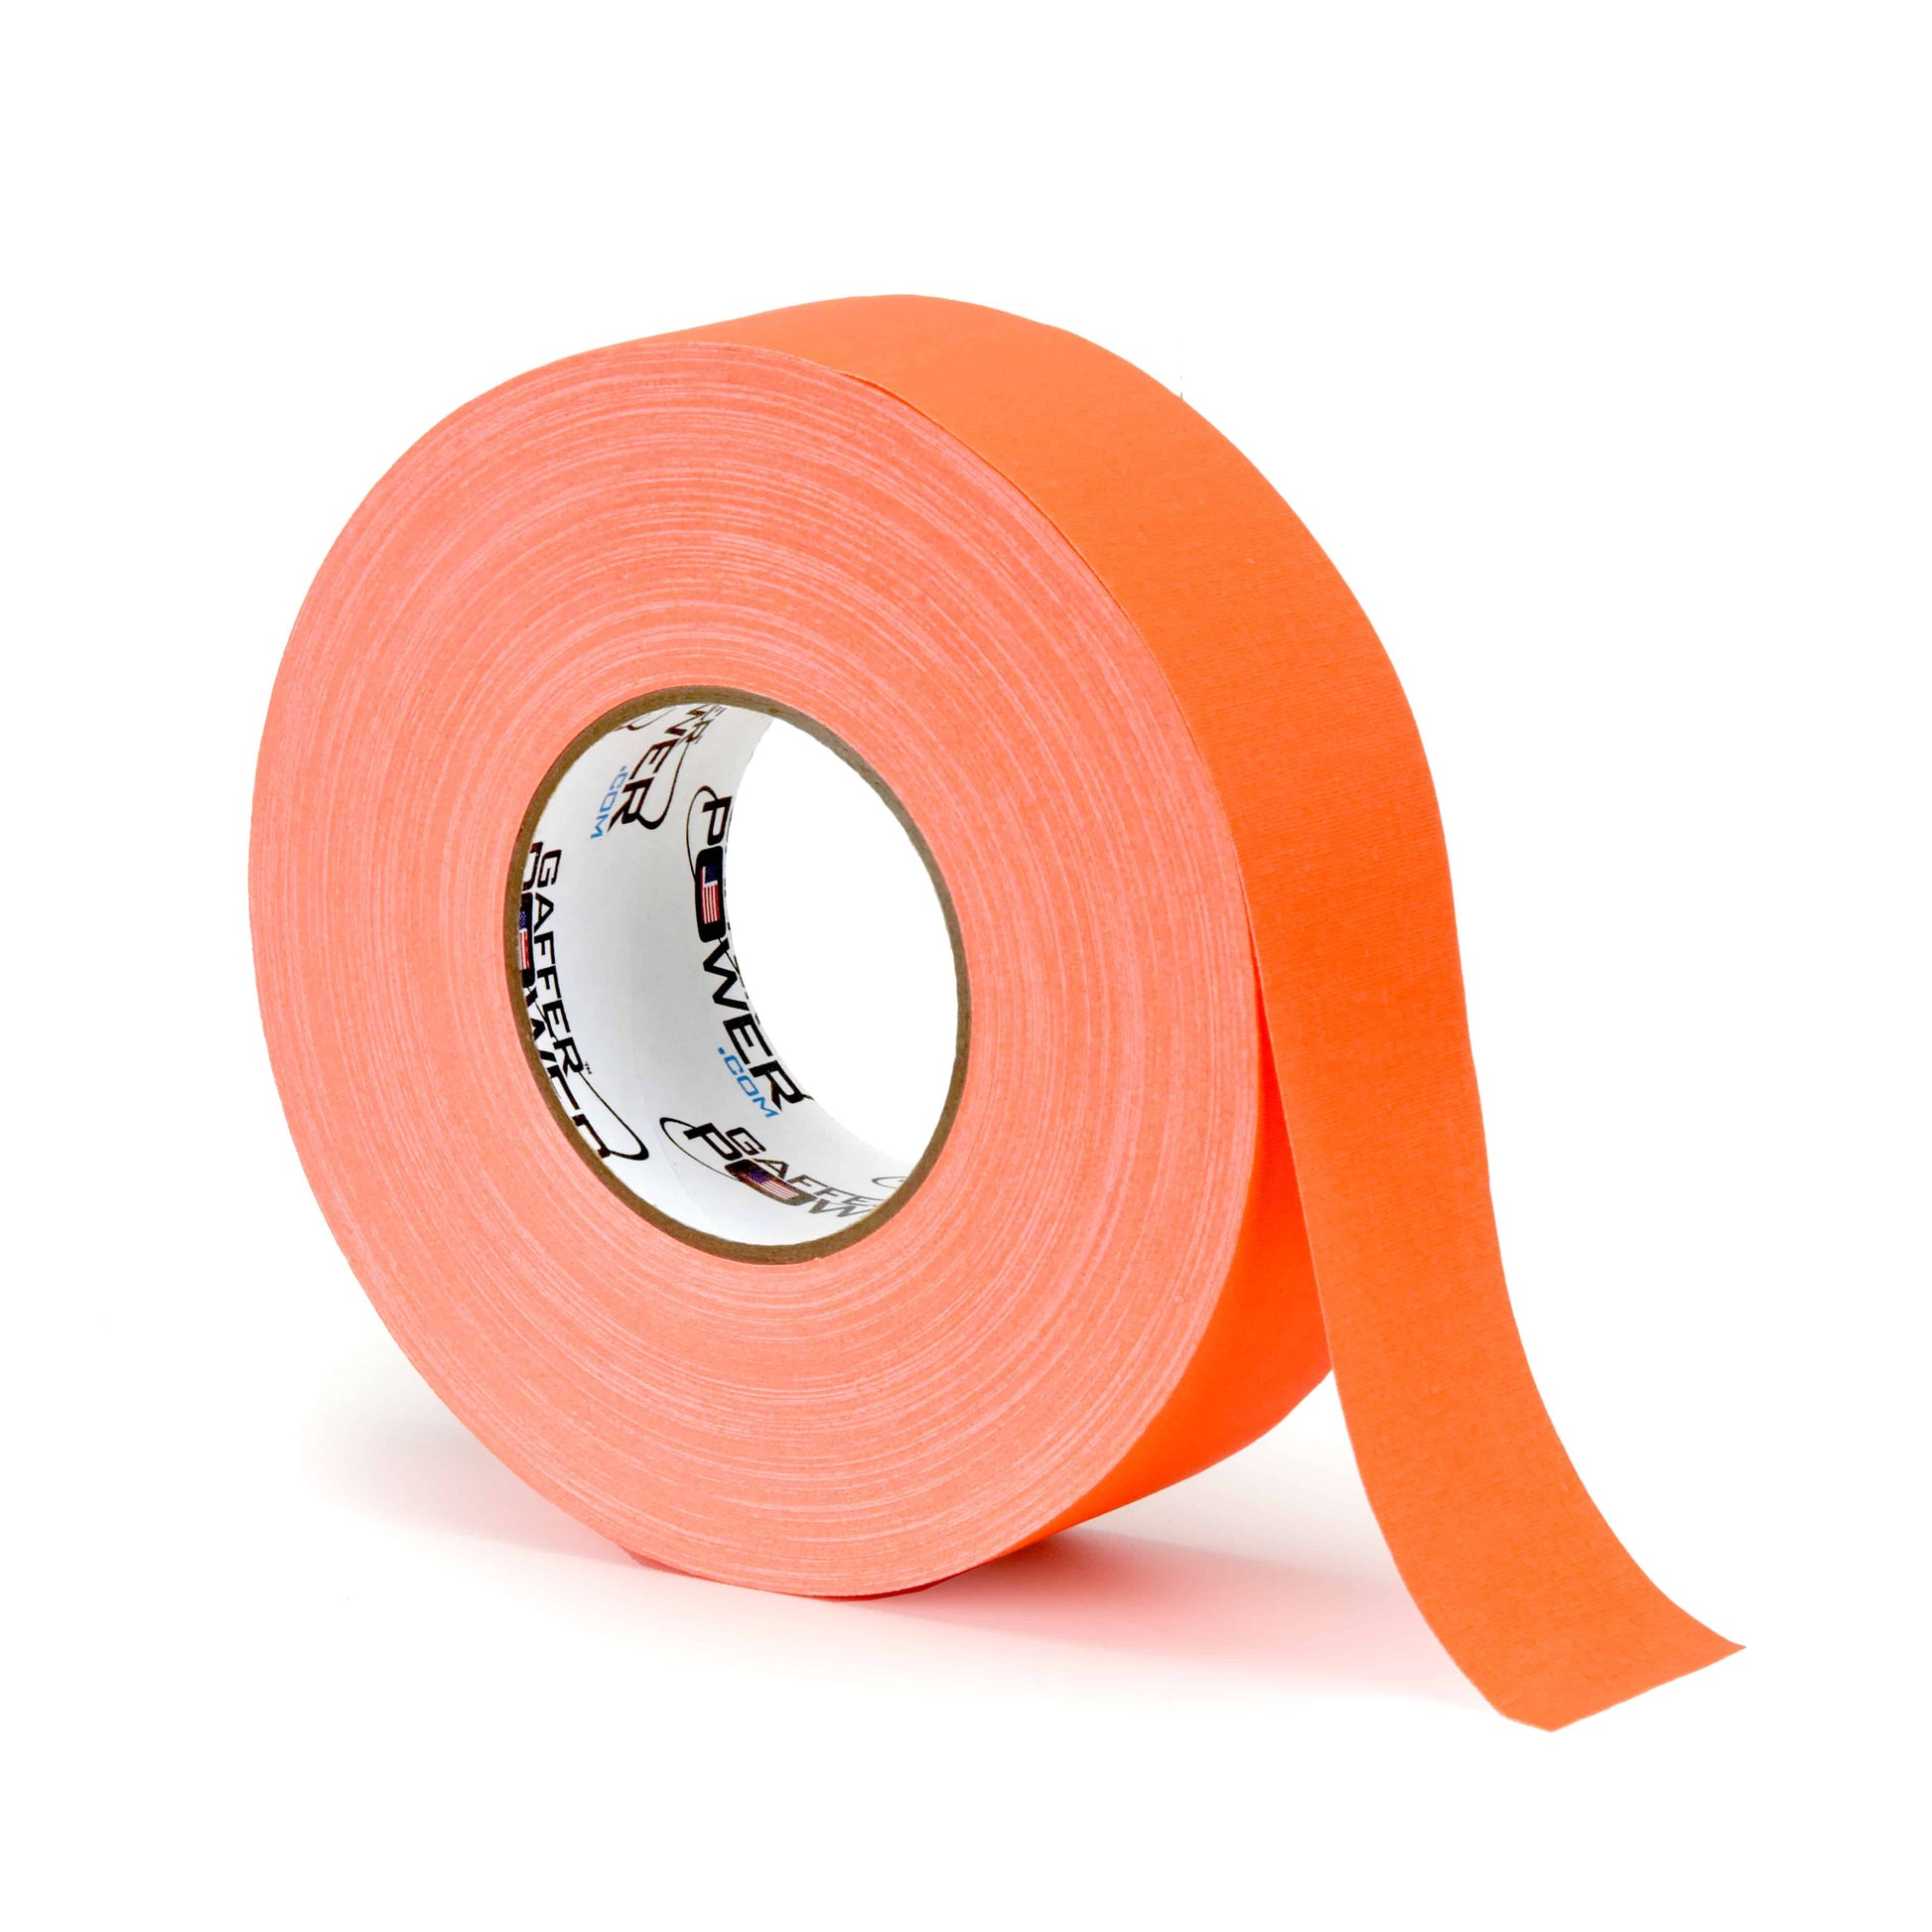 Professional USA Made PickelBall Line Marking Tape and grip tape